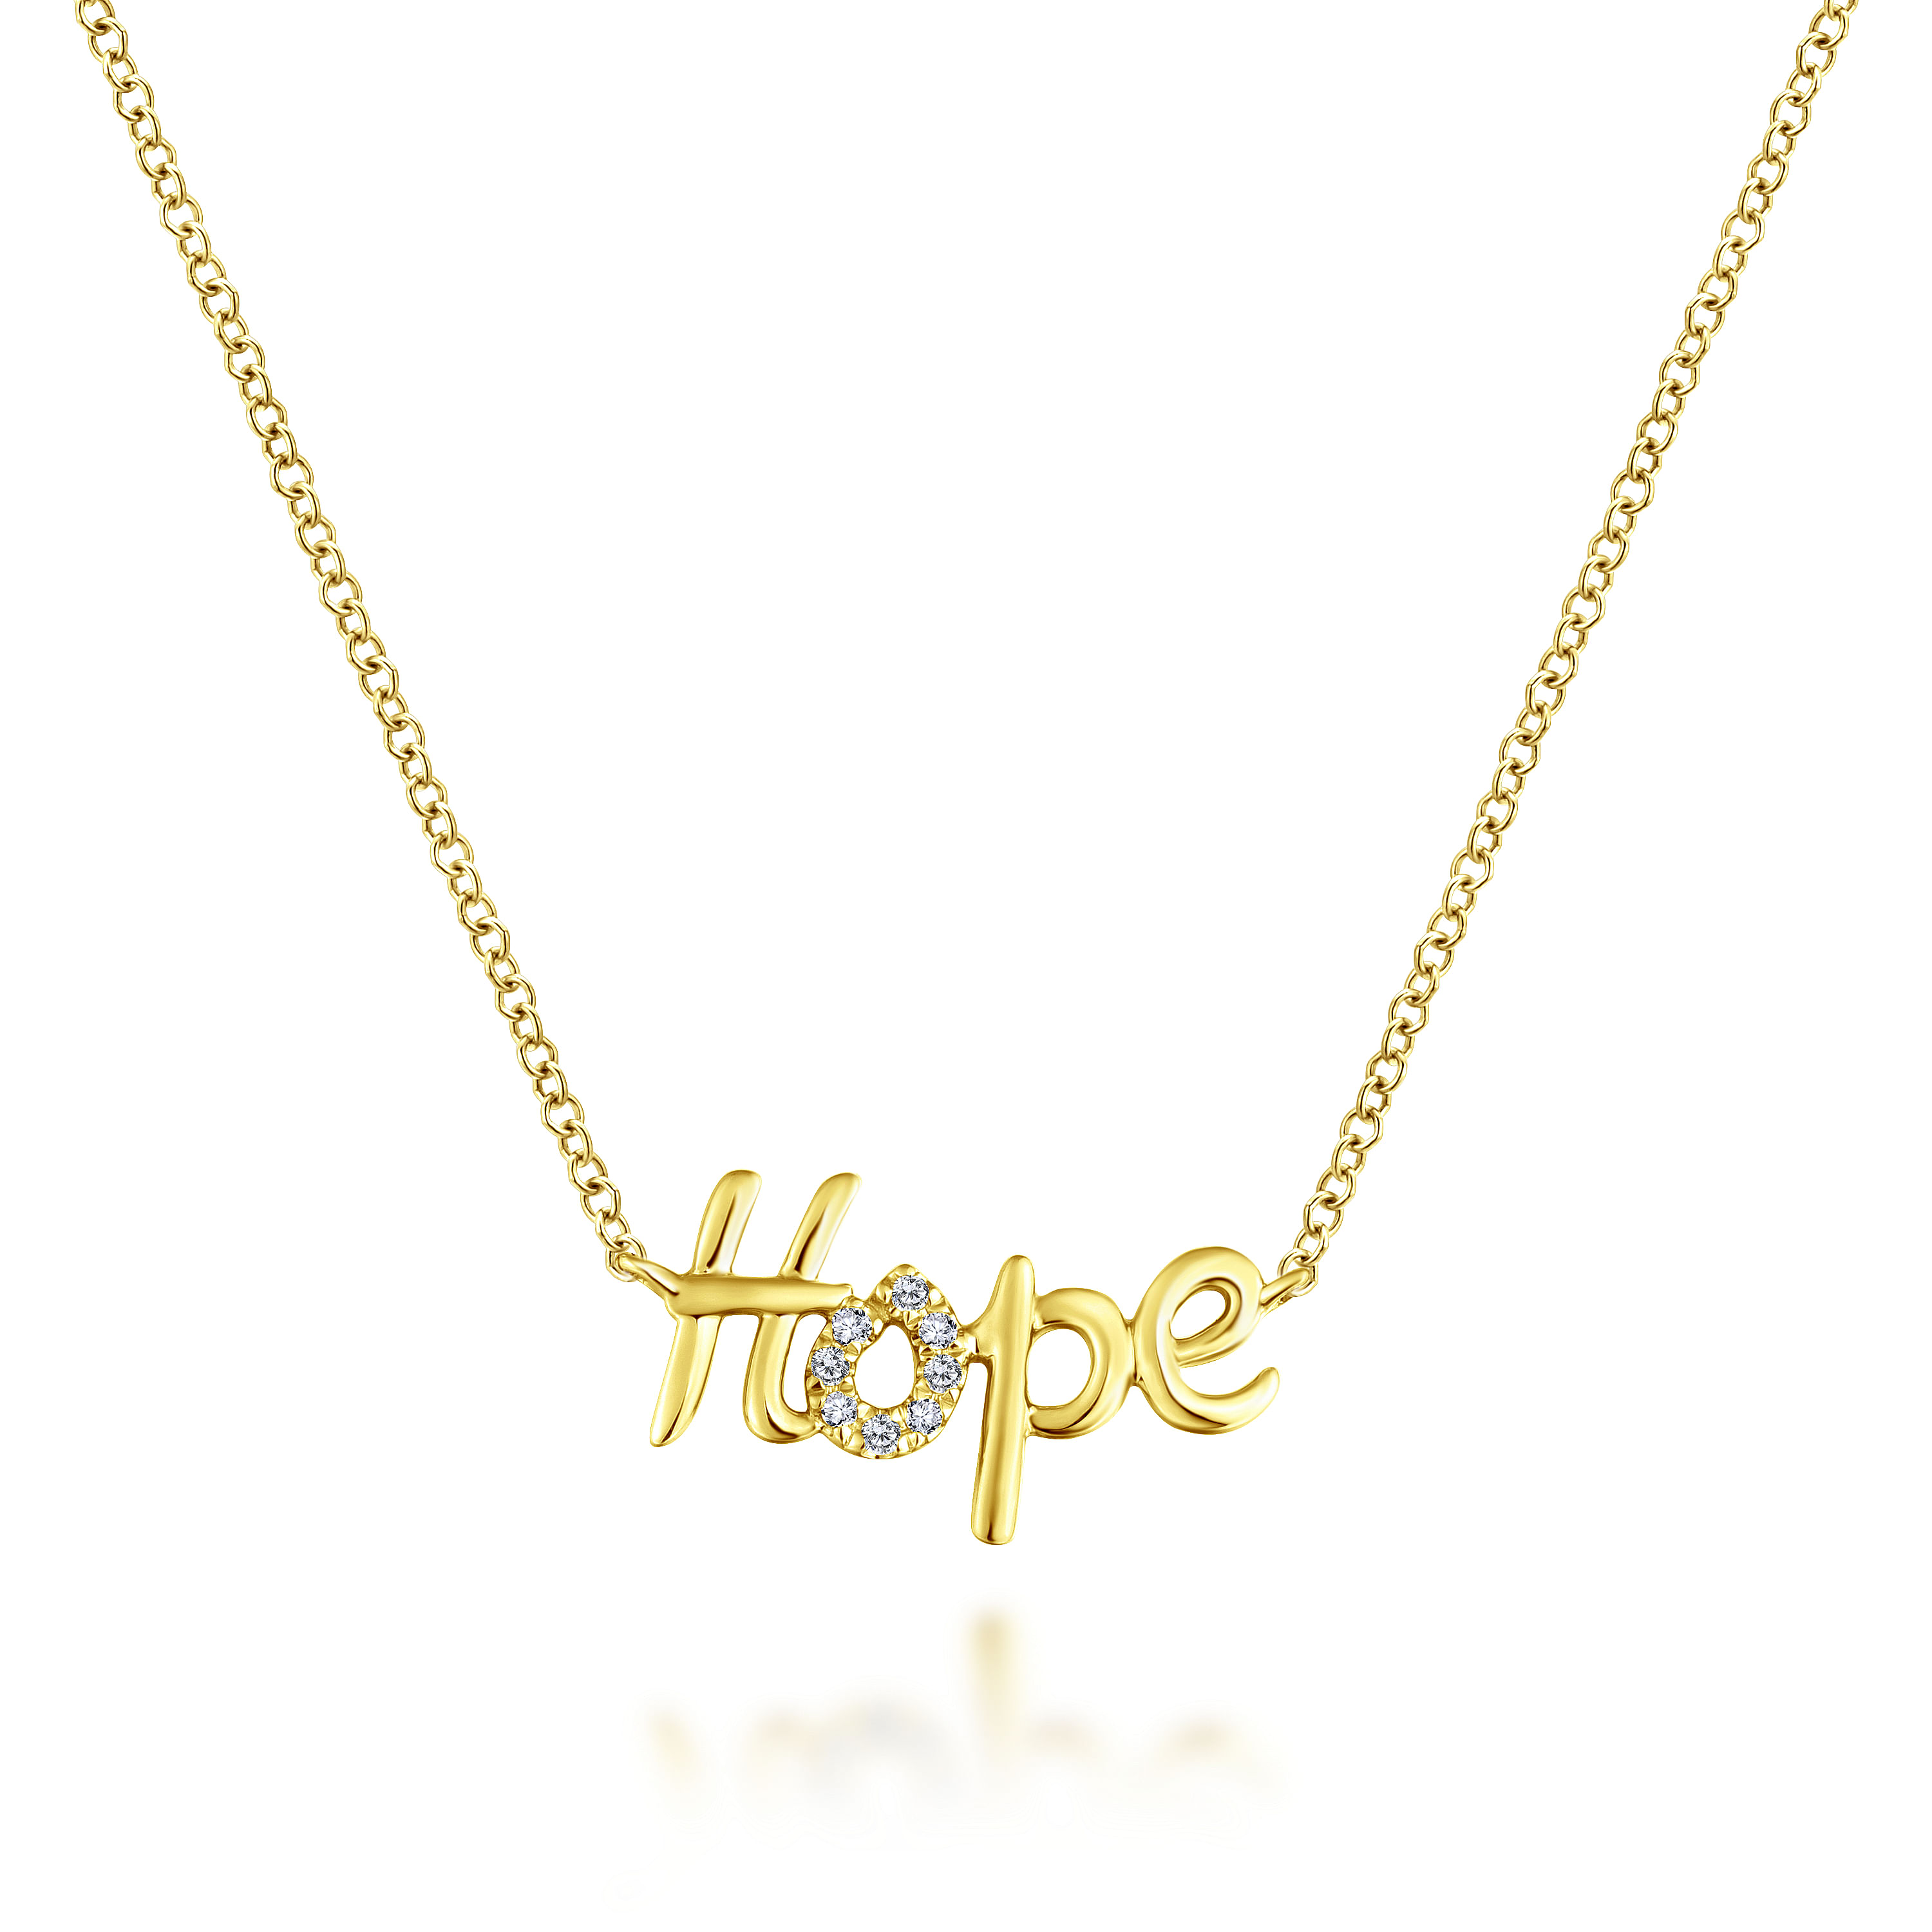 14K Yellow Gold Hope Necklace with Diamond Pavé